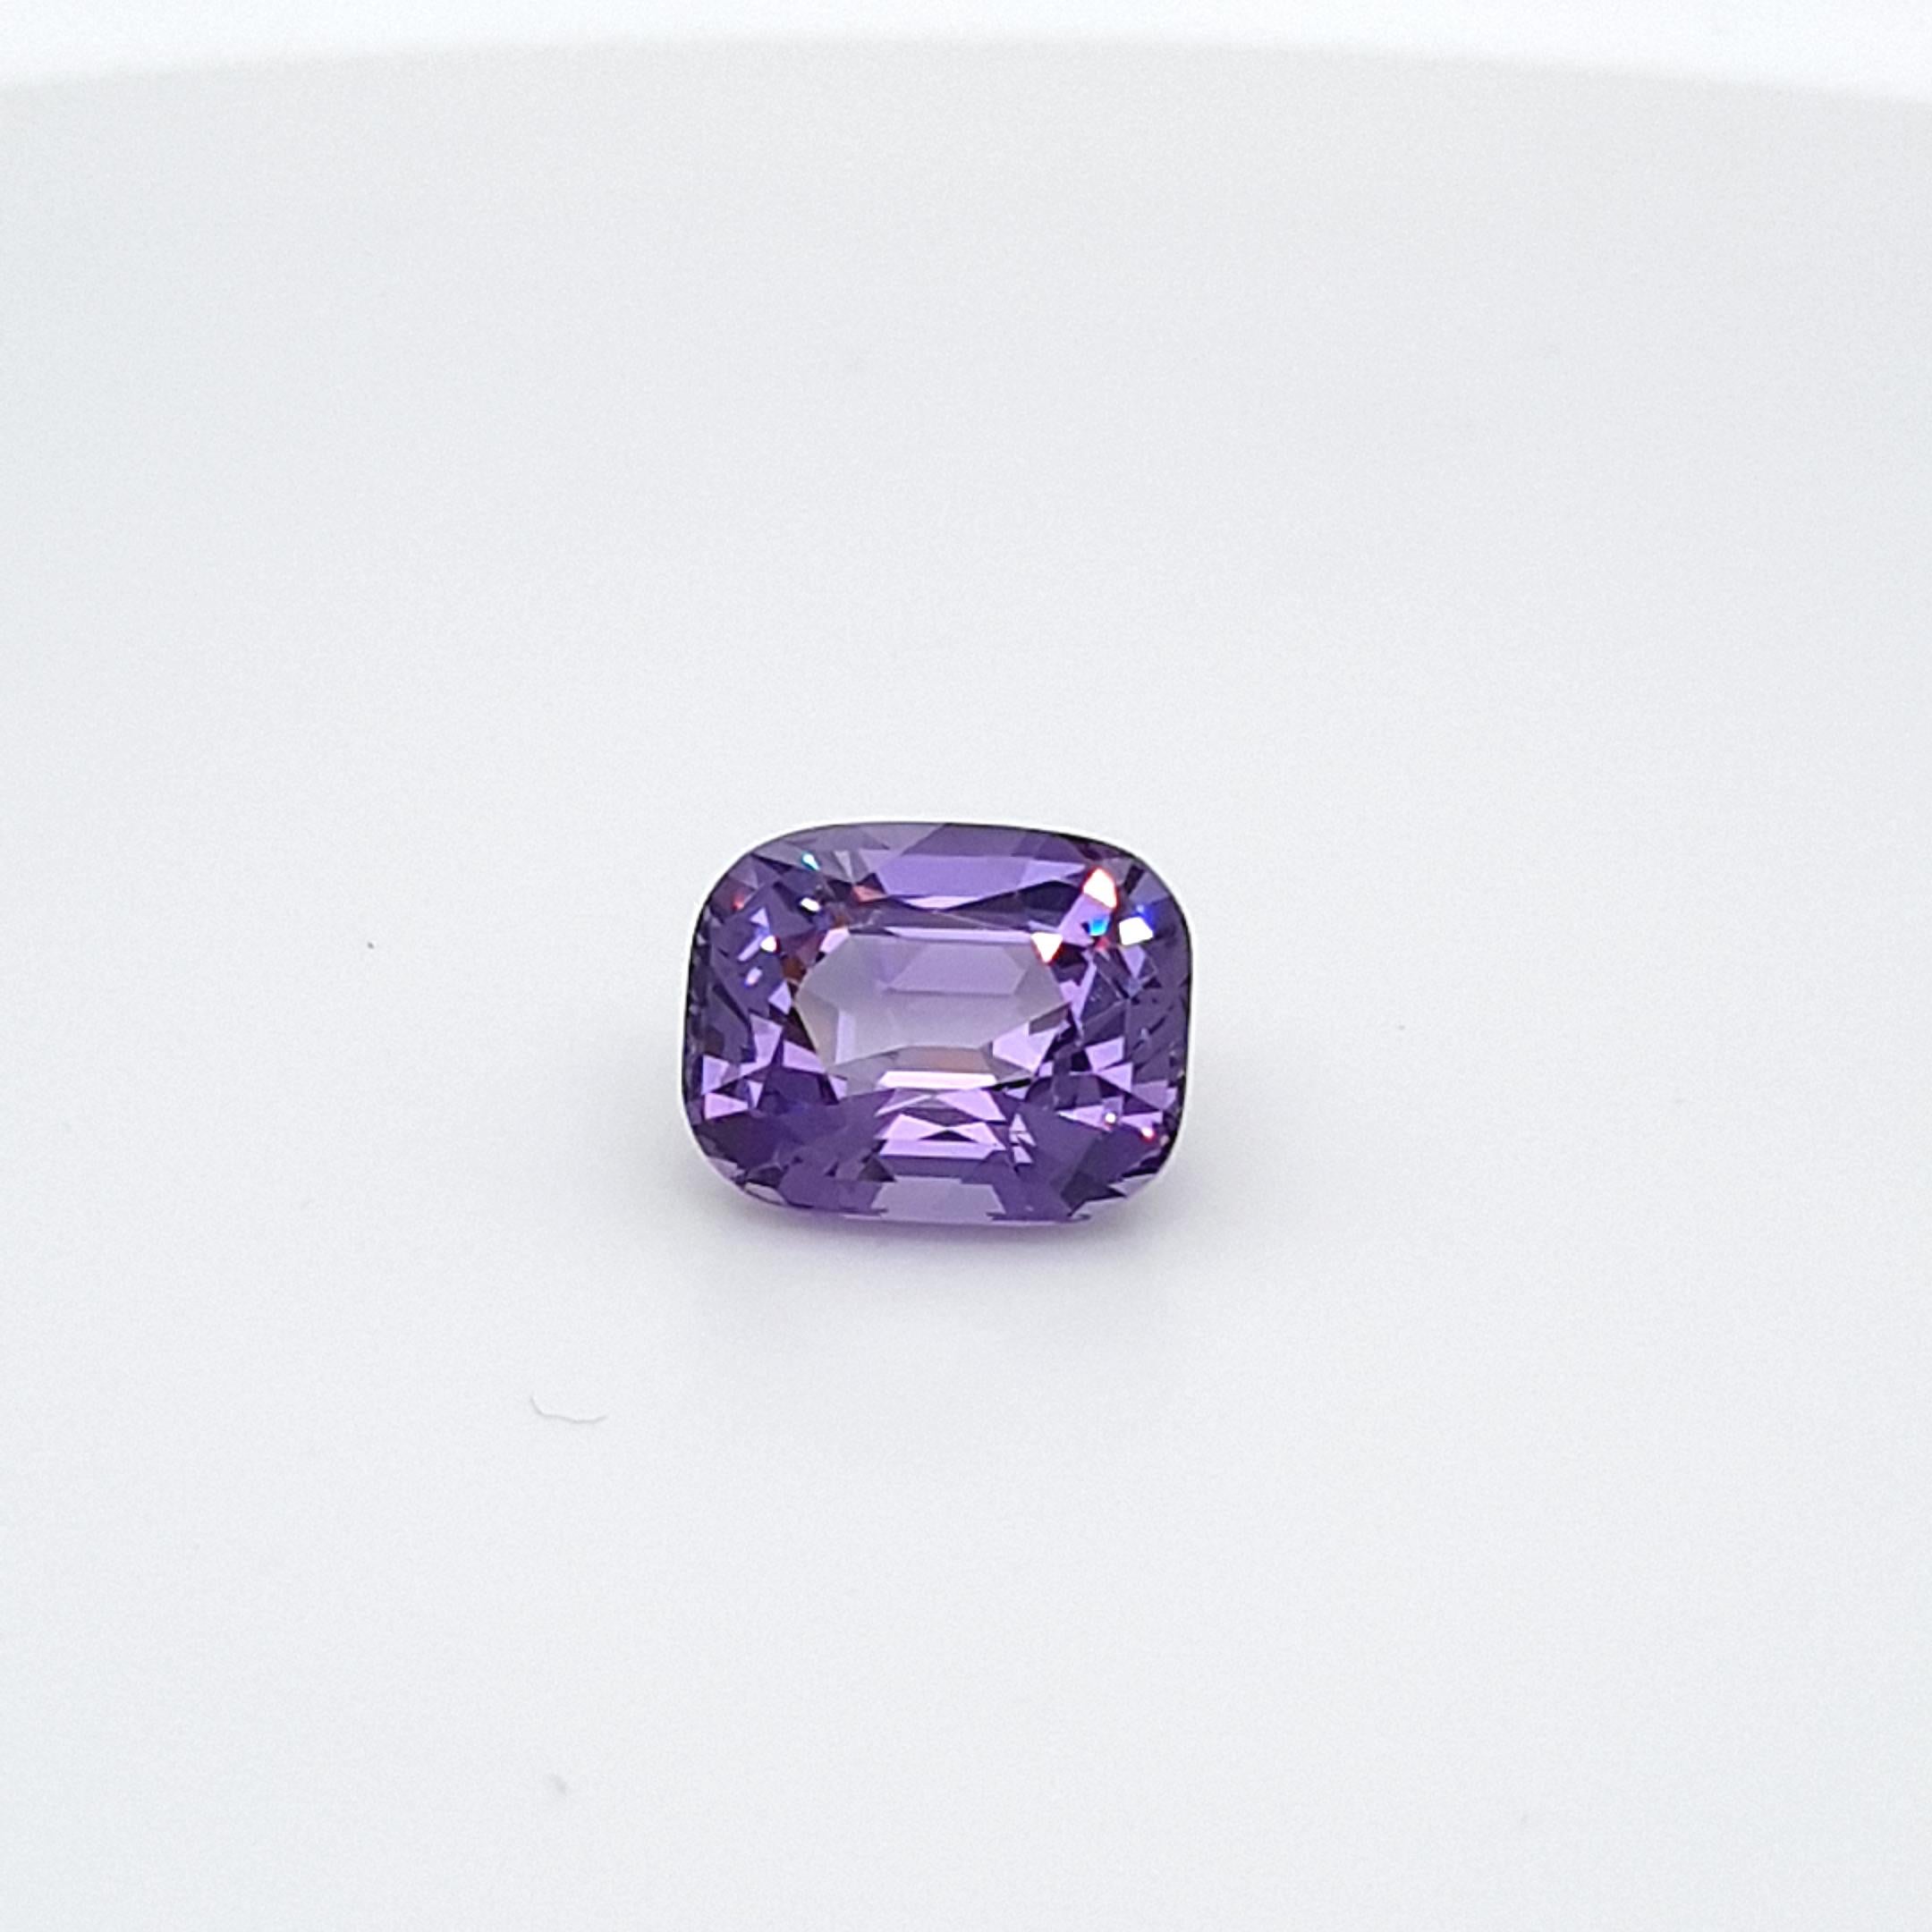 We are delighted to be able to offer for sale, this 4,63 ct. Violet Spinel from our exclusive collection.
This beautiful gem has a soft purplish violet color and a great fire. Cutting, proportion and cleaness enable an very high light return from